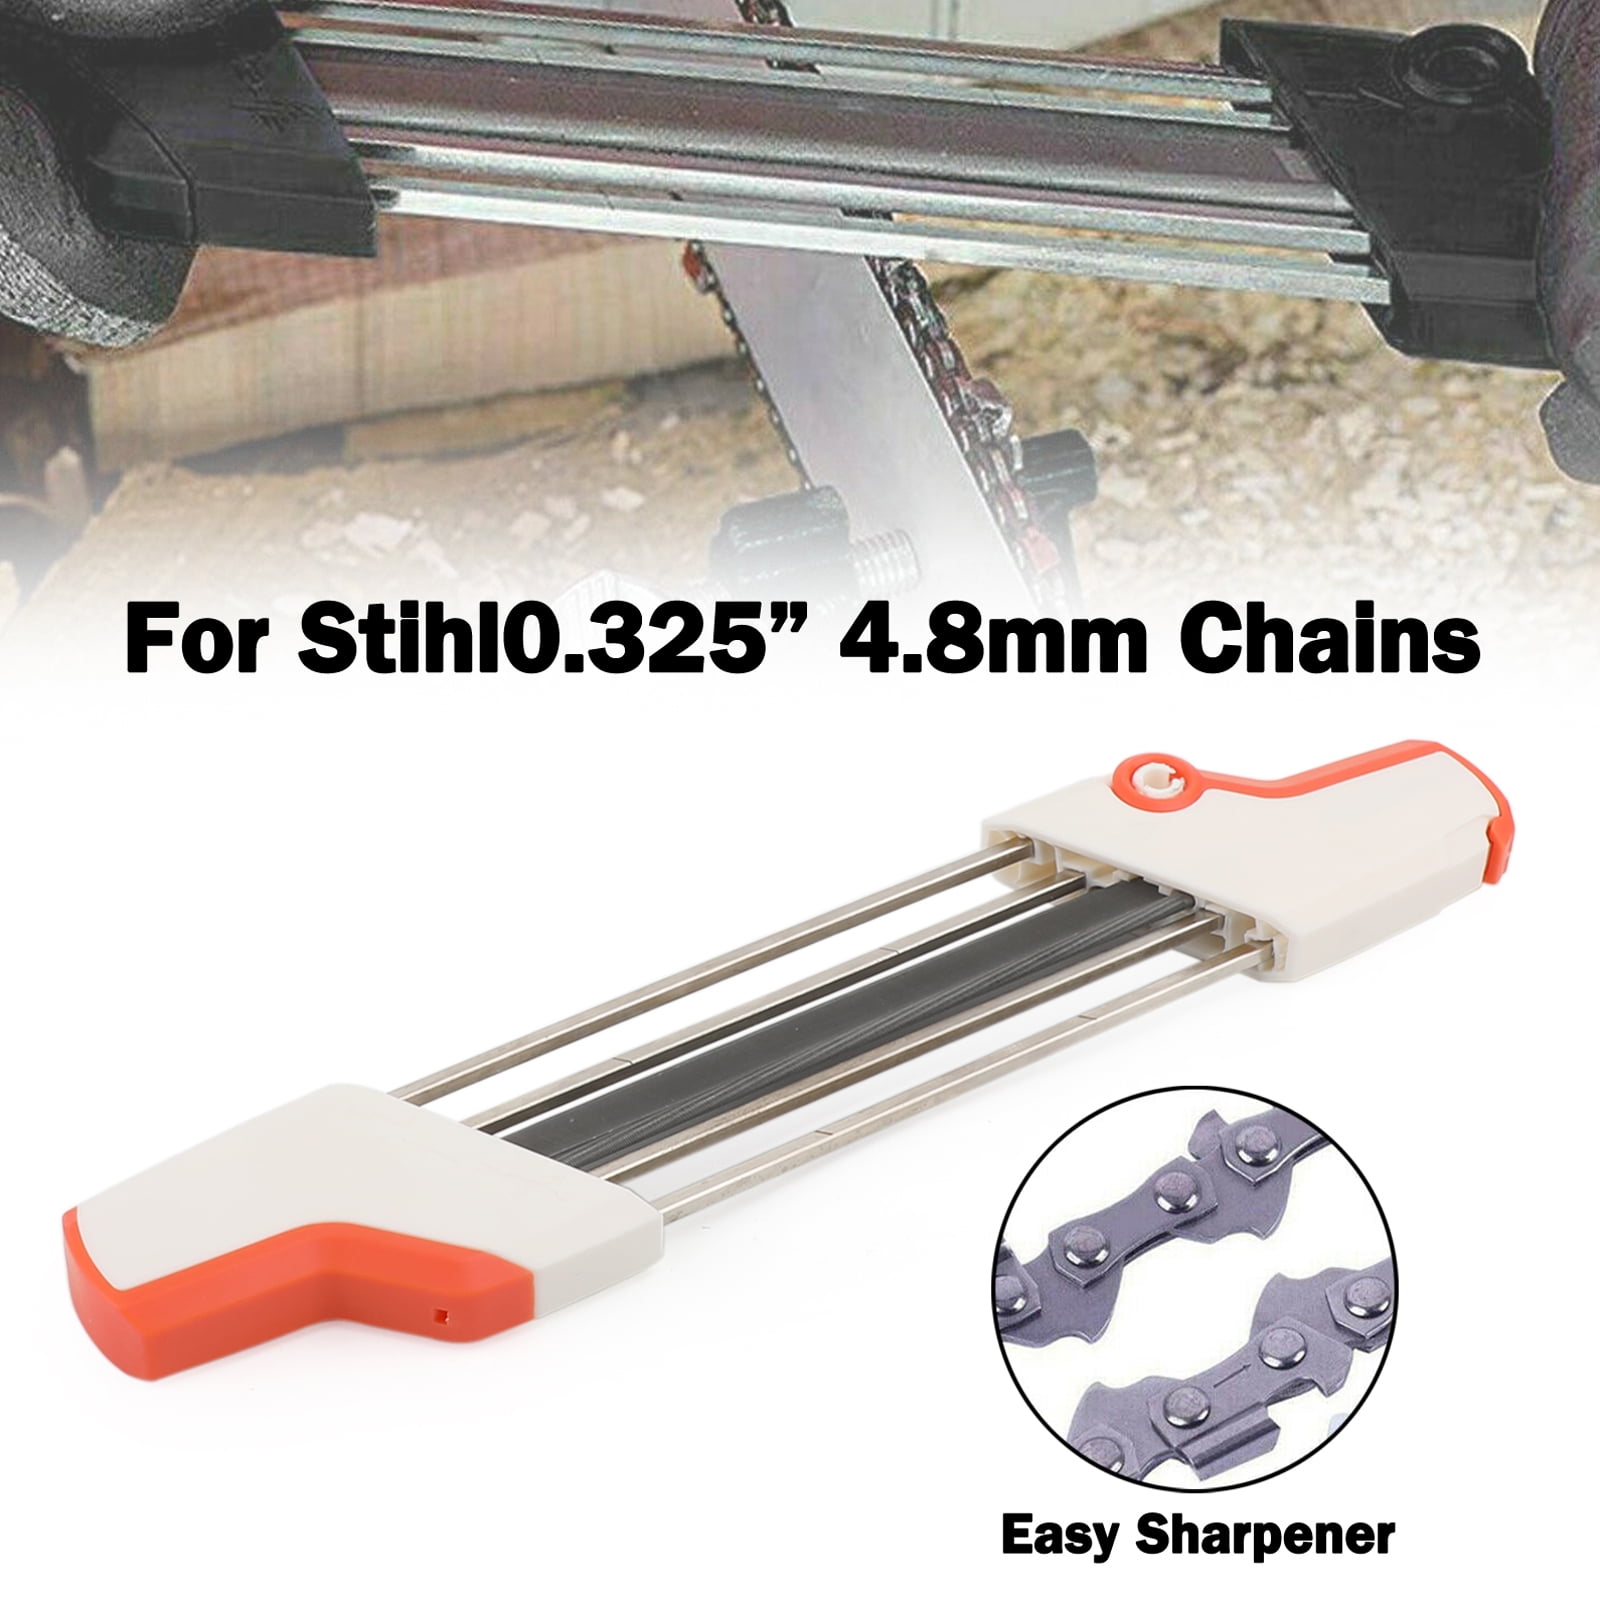 File & Guide Hand Shapener 3 Sizes To Choose From For STIHL Chainsaws 